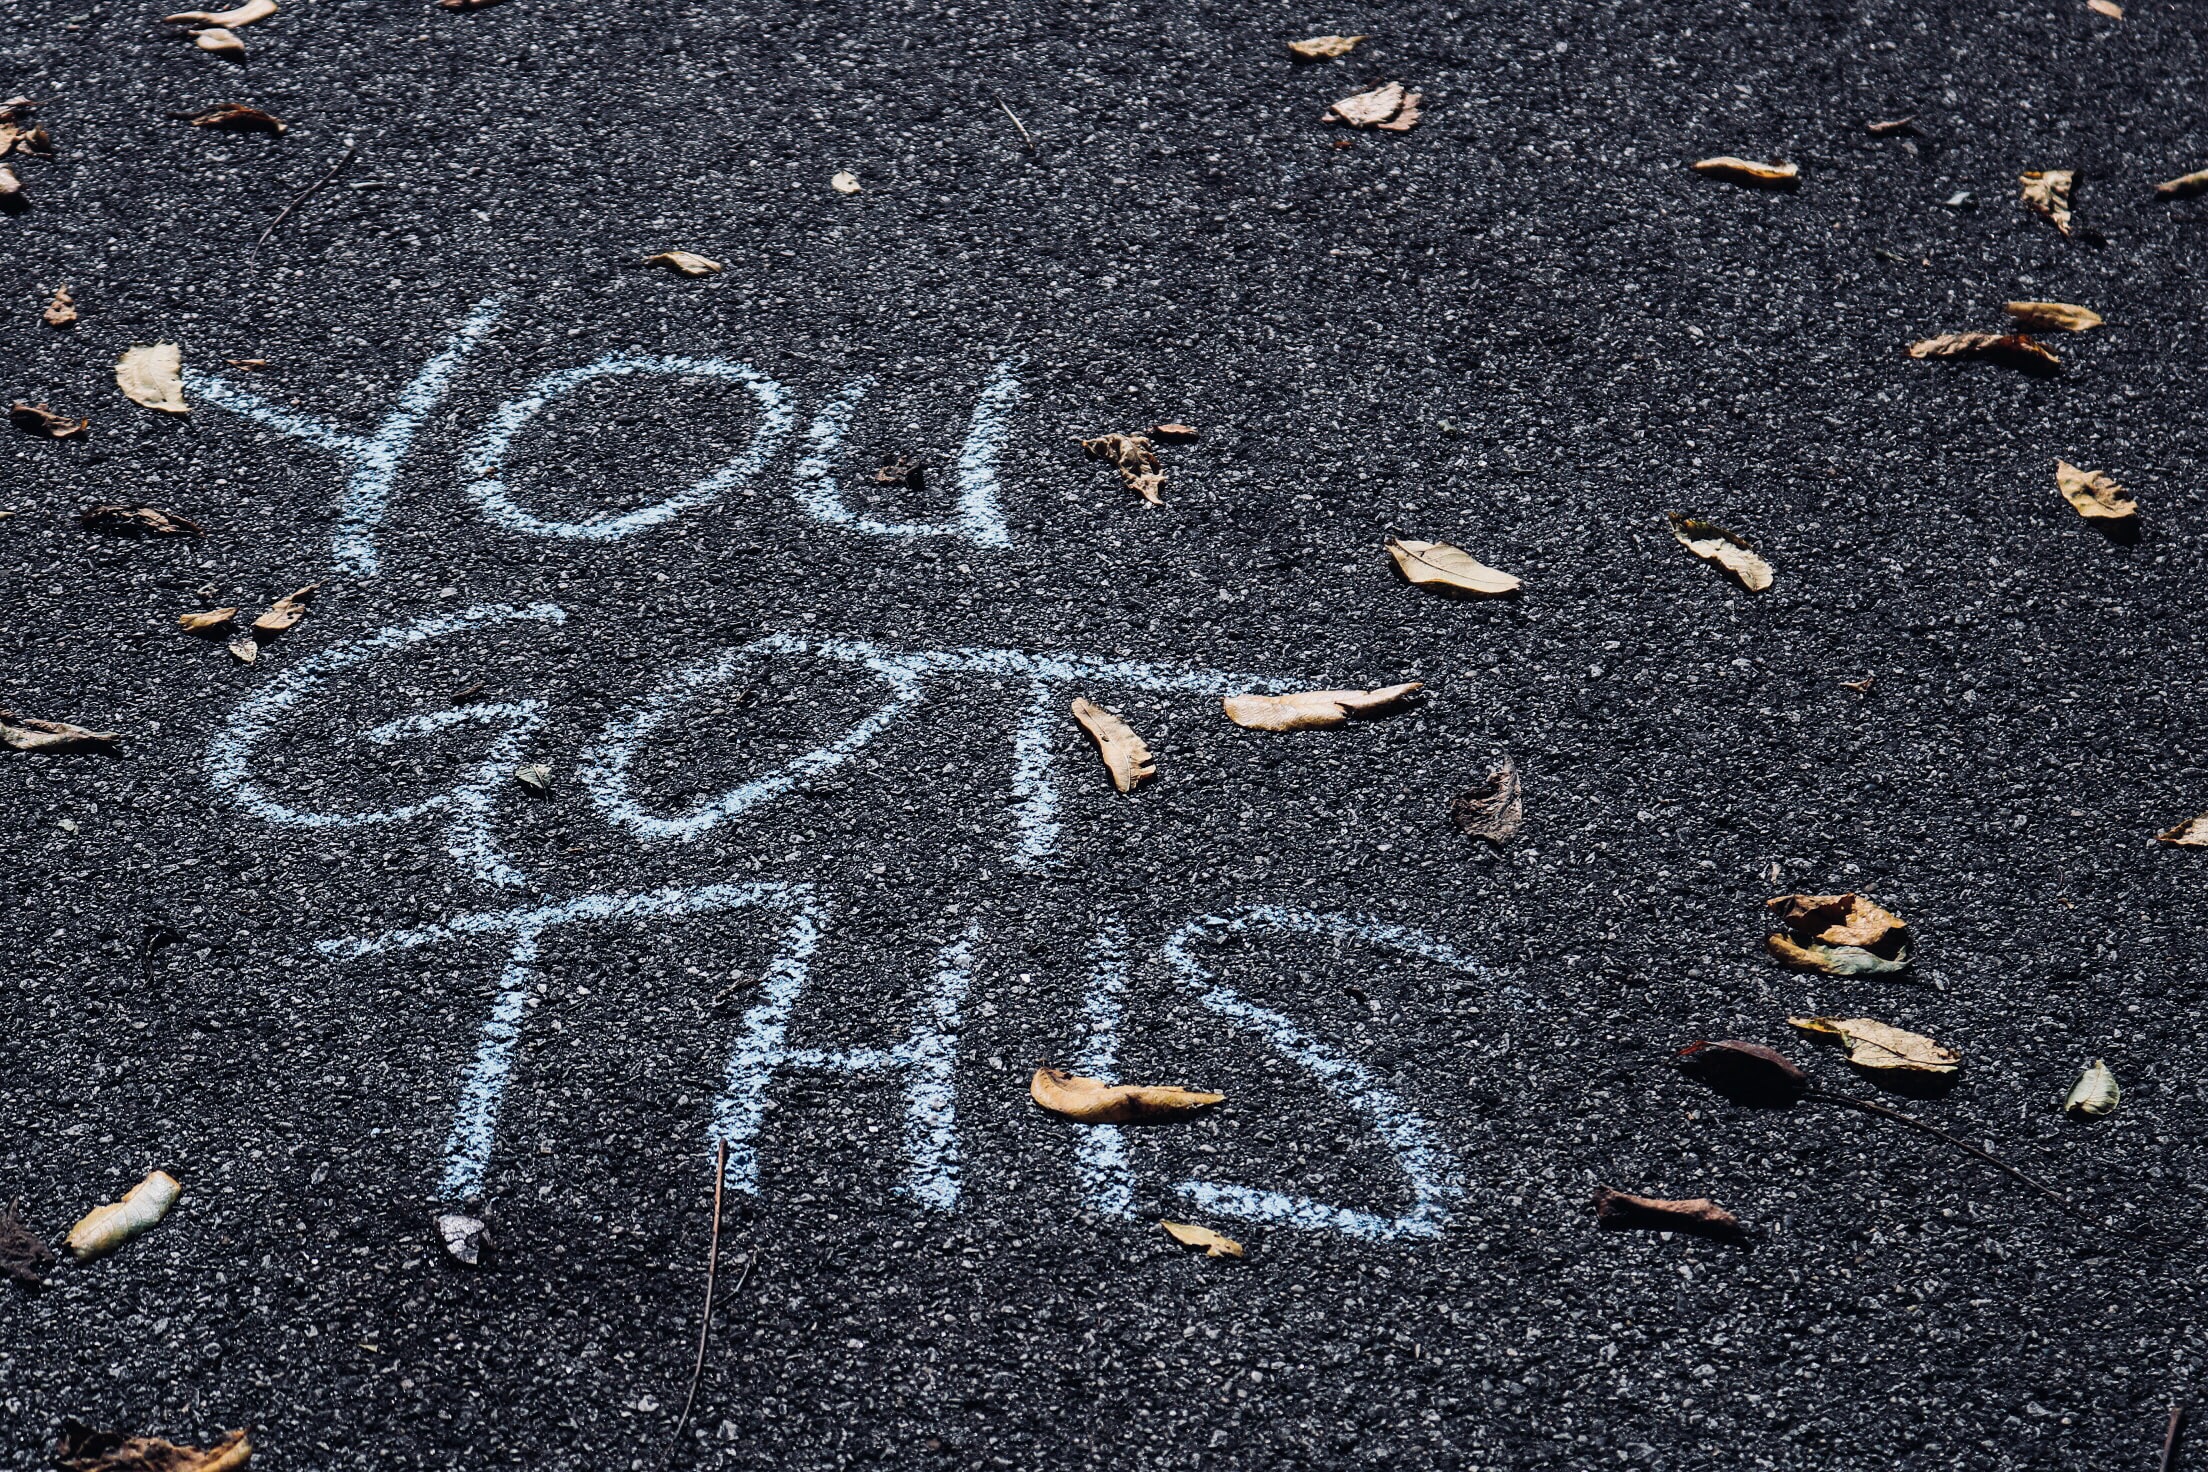 Photot: 'you got this' written in chalk on concrete